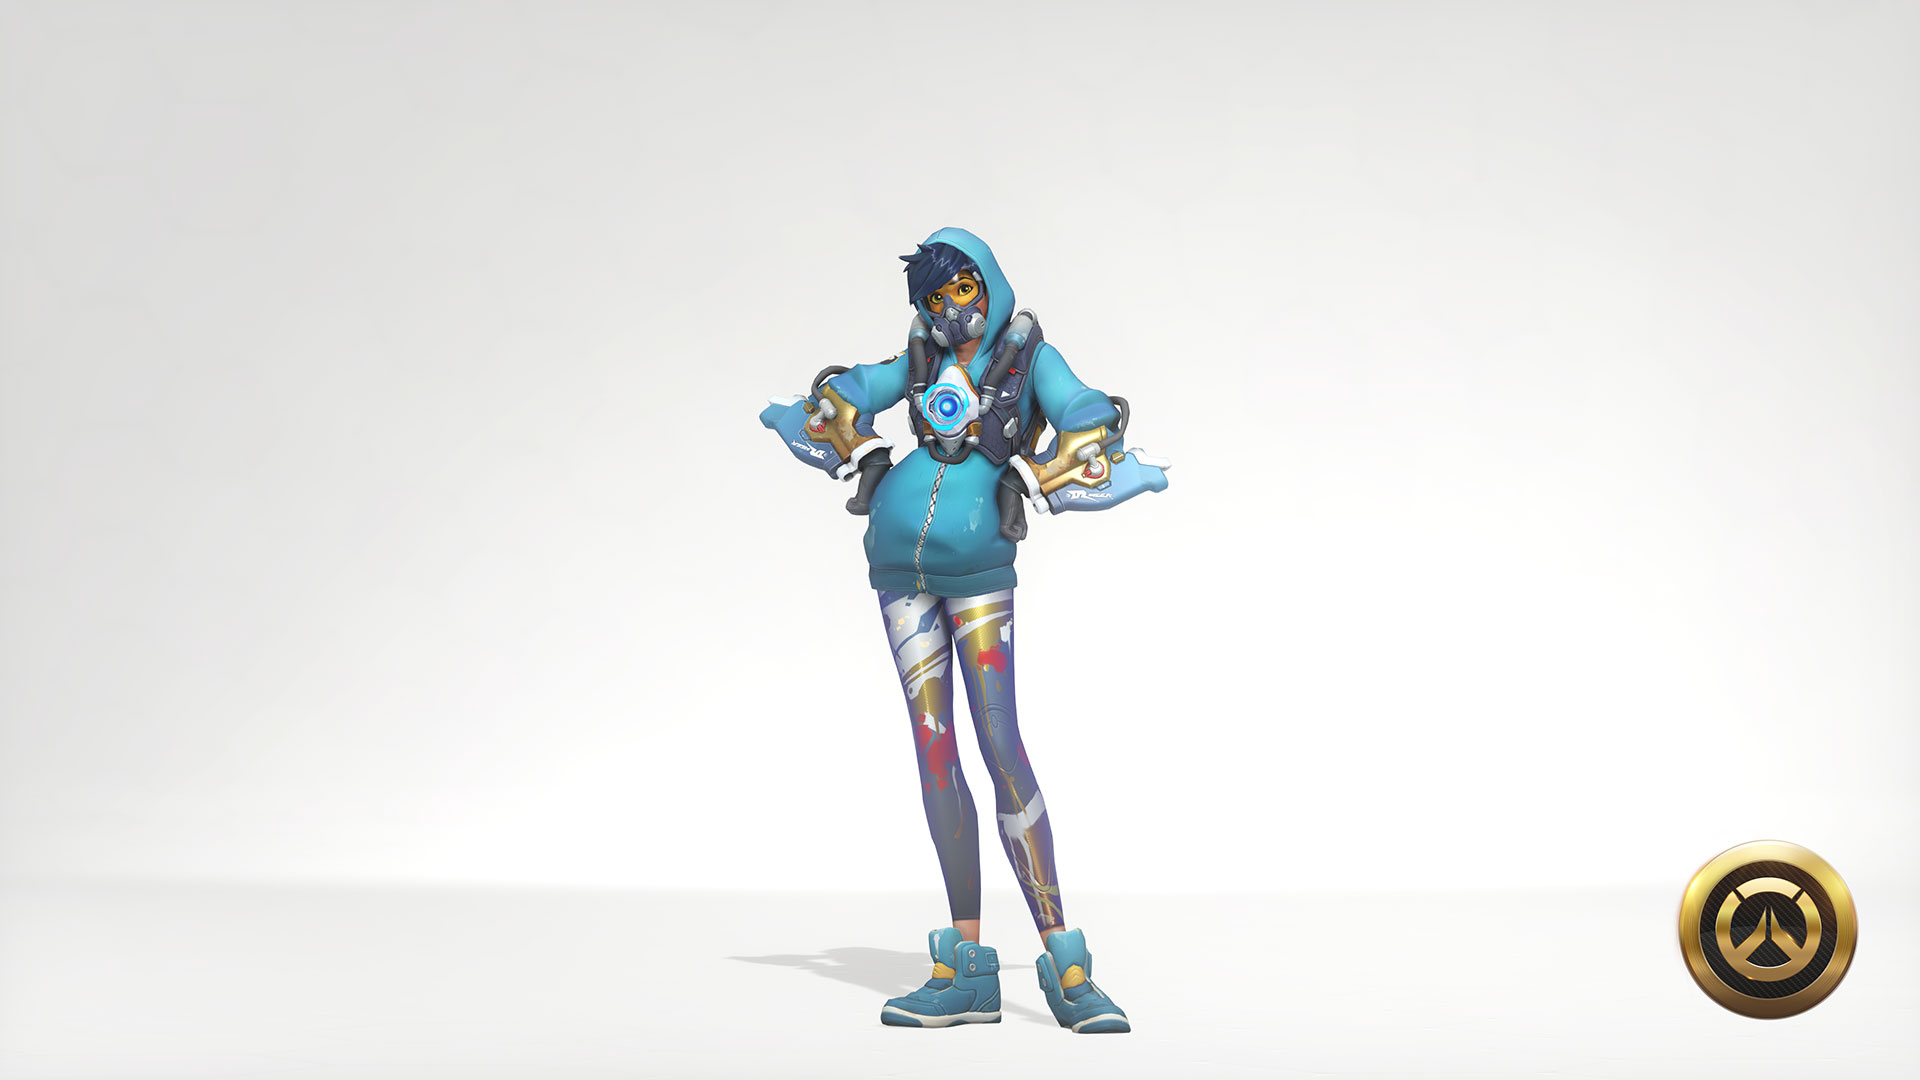 New tracer skin for the anniversary event. Hope I can get it